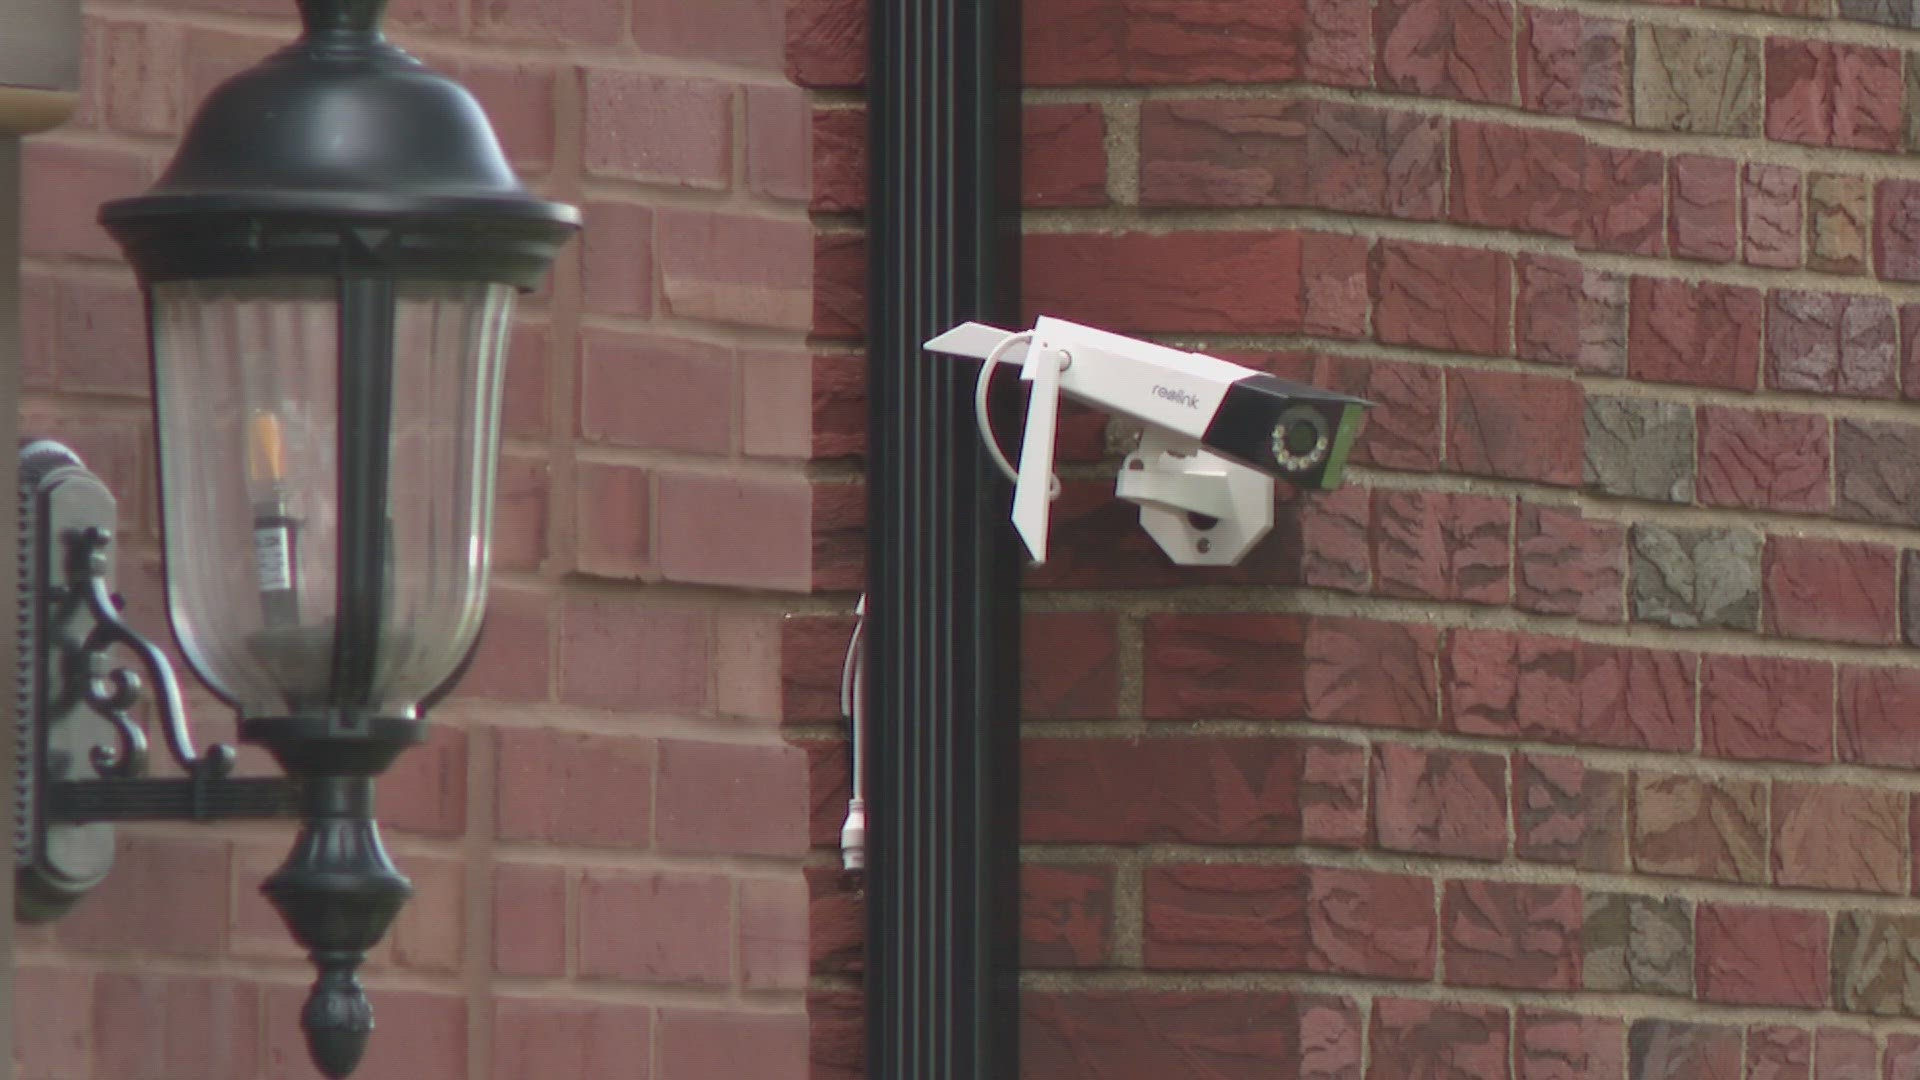 When it comes to crime prevention, some St. Louis Hill residents are taking matters into their own hands. They say it has been a success.